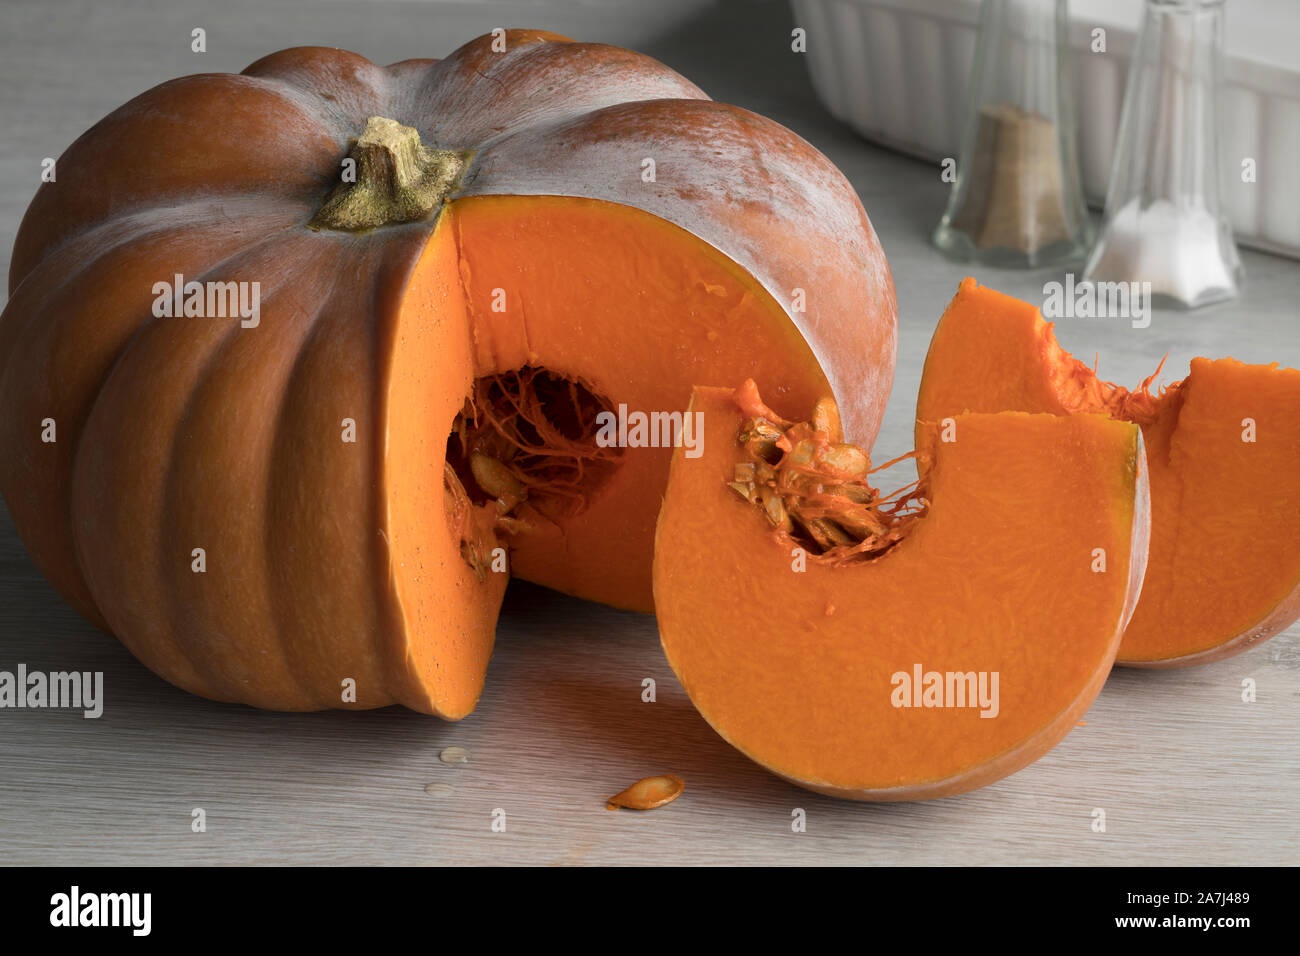 Orange Moschata pumpkin sliced into parts for cooking Stock Photo